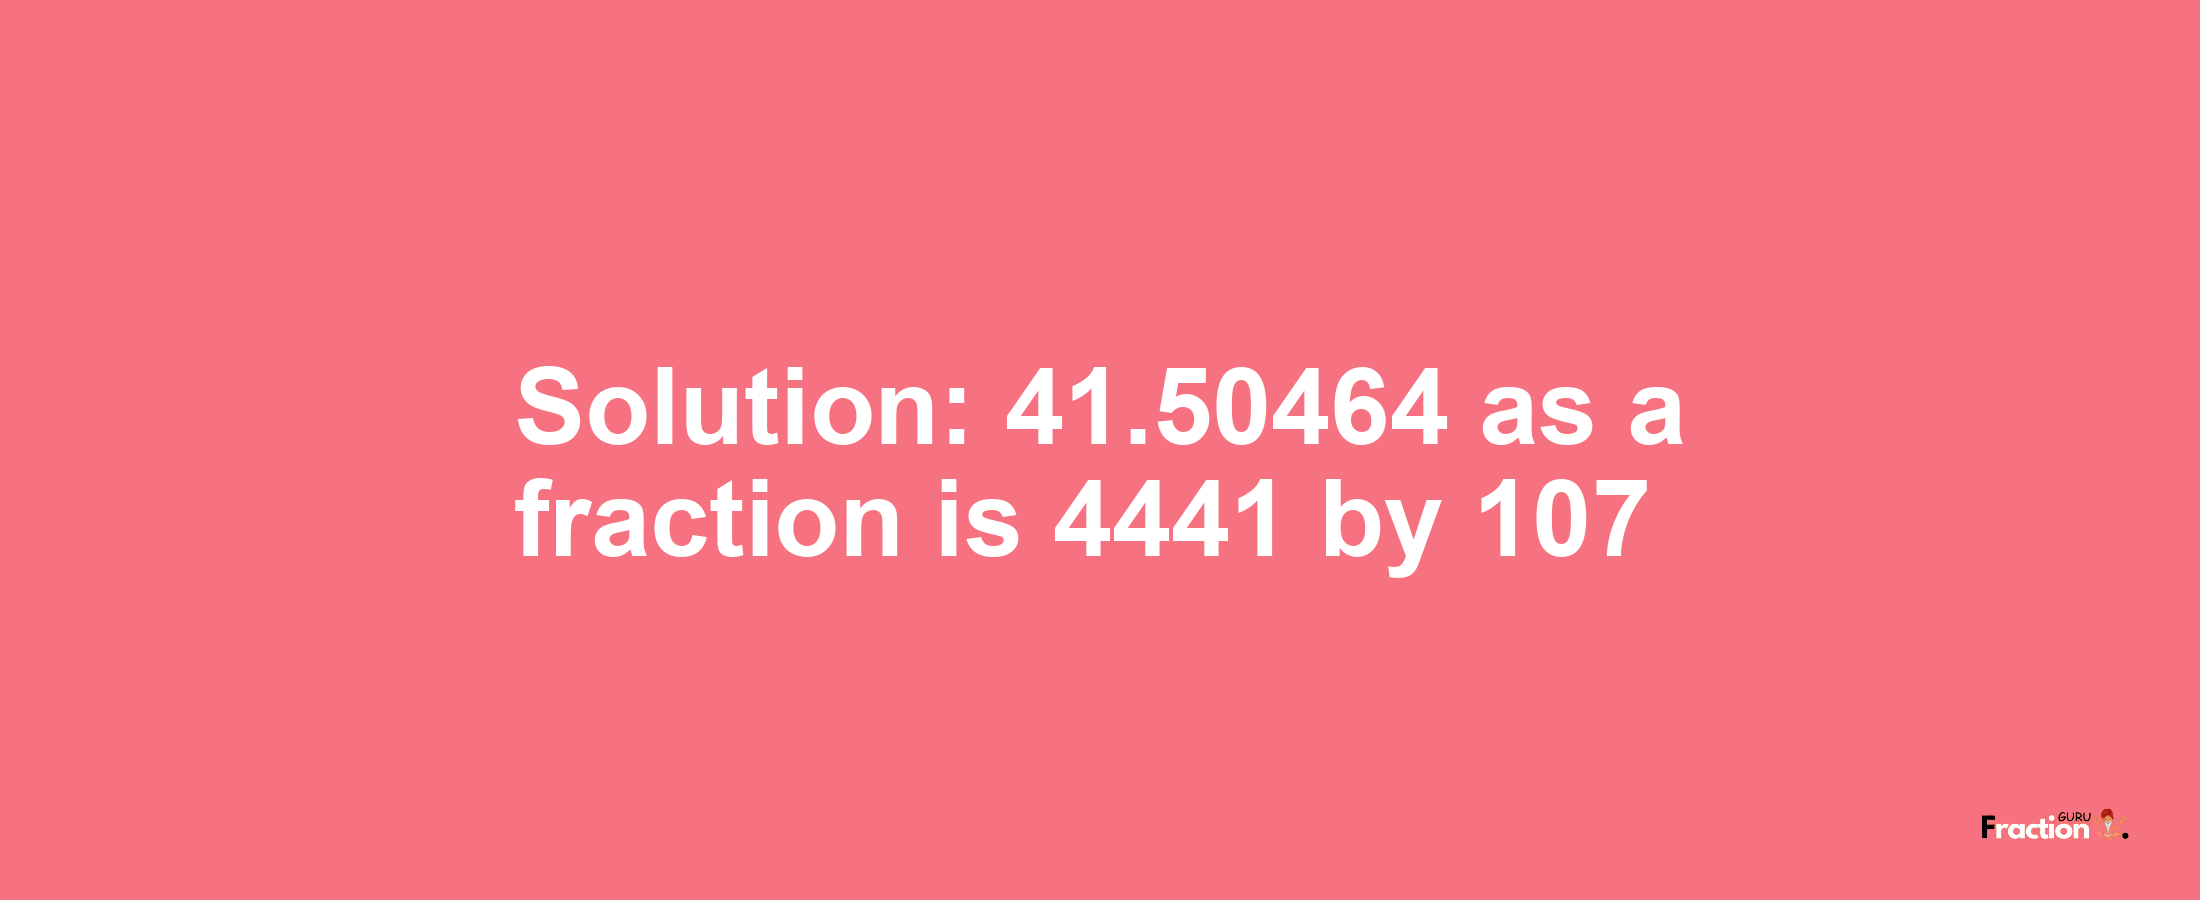 Solution:41.50464 as a fraction is 4441/107